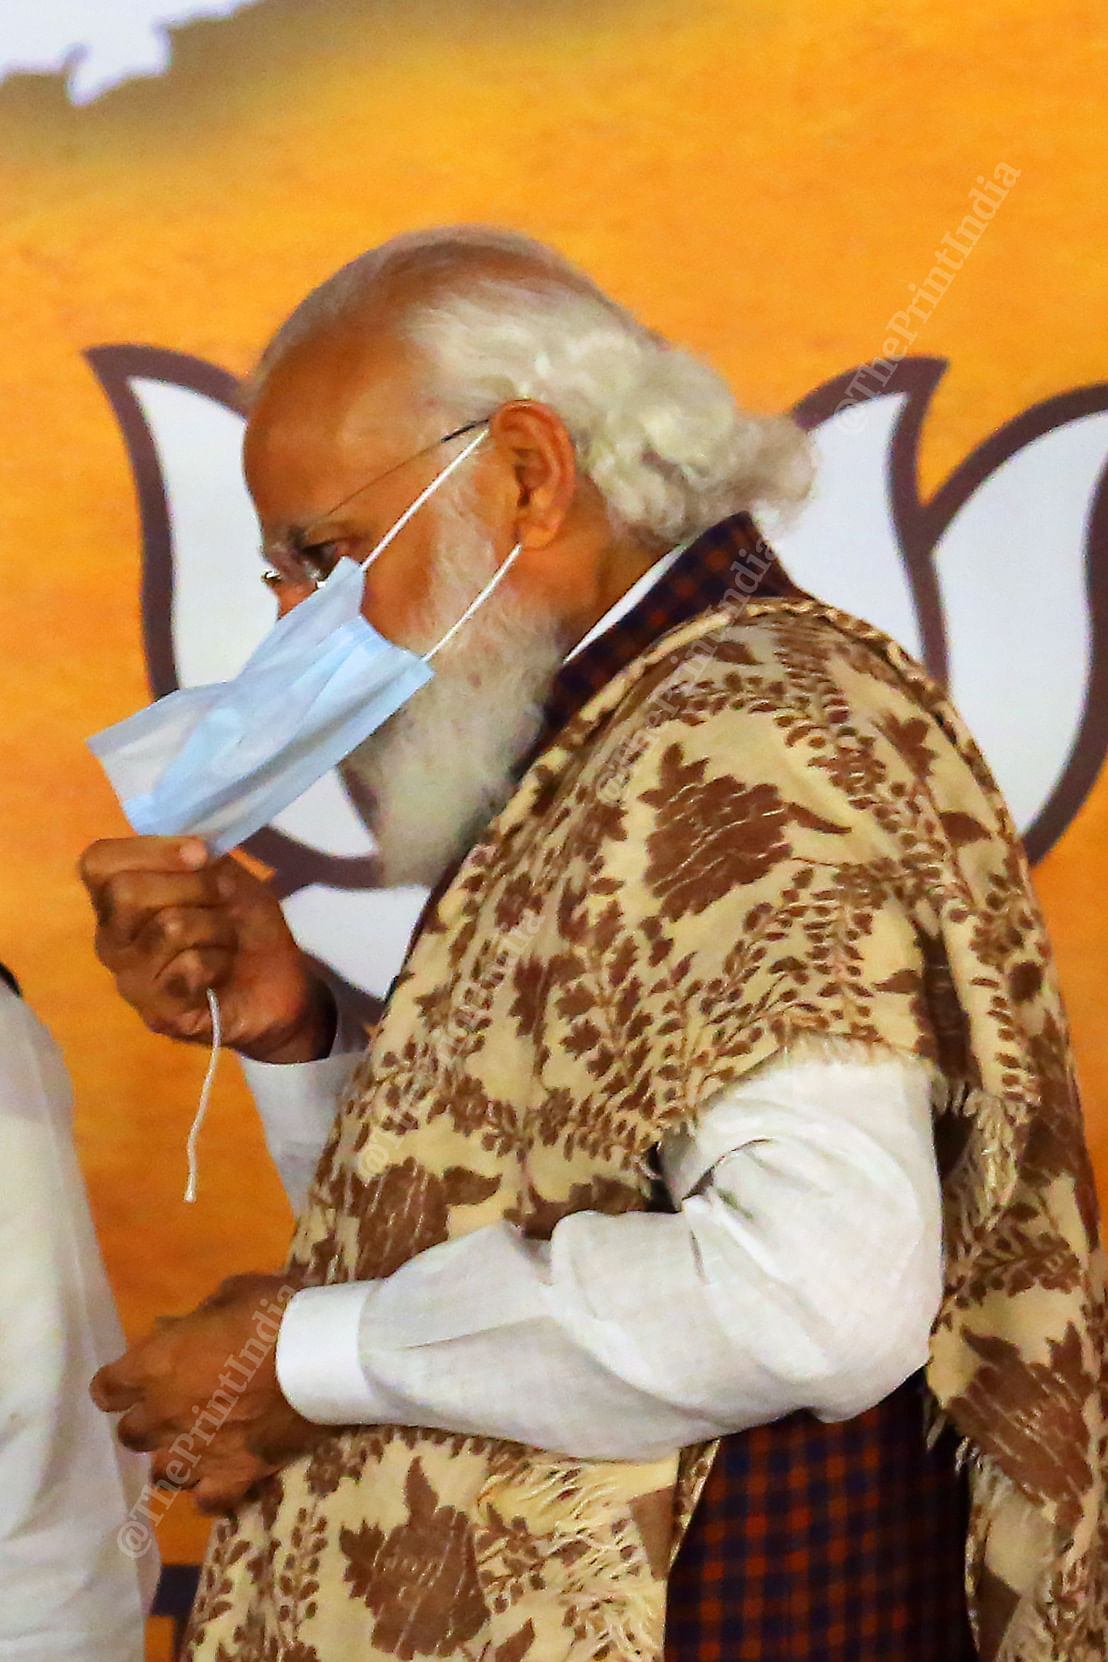 PM Modi trying to cover his face after the elastic string of his face mask snapped Photo: Praveen Jain | ThePrint